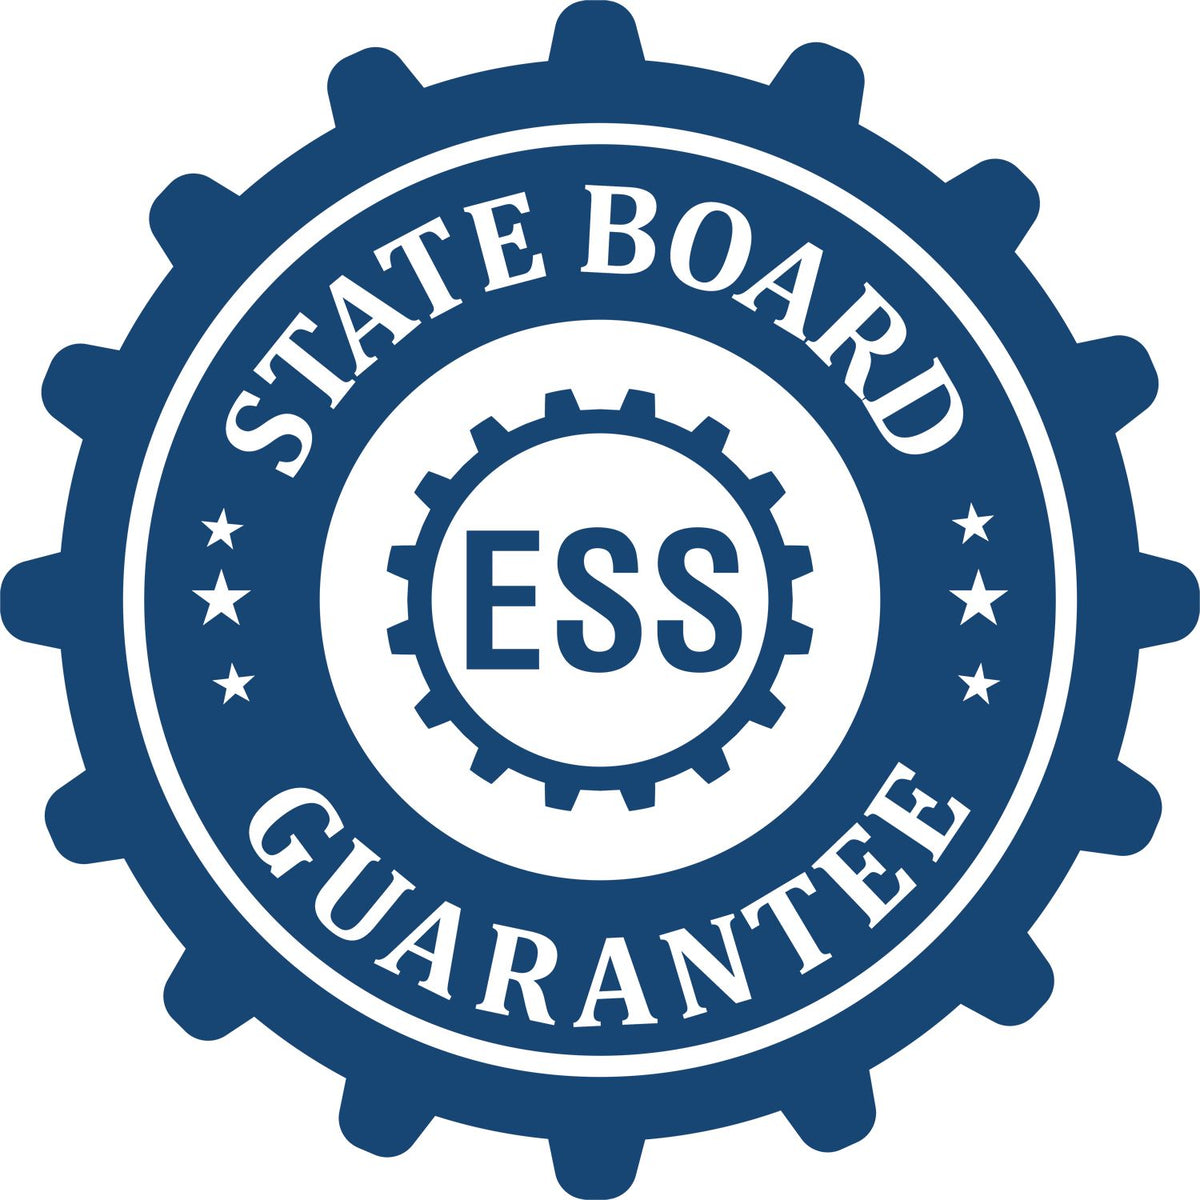 An emblem in a gear shape illustrating a state board guarantee for the Indiana Desk Architect Embossing Seal product.